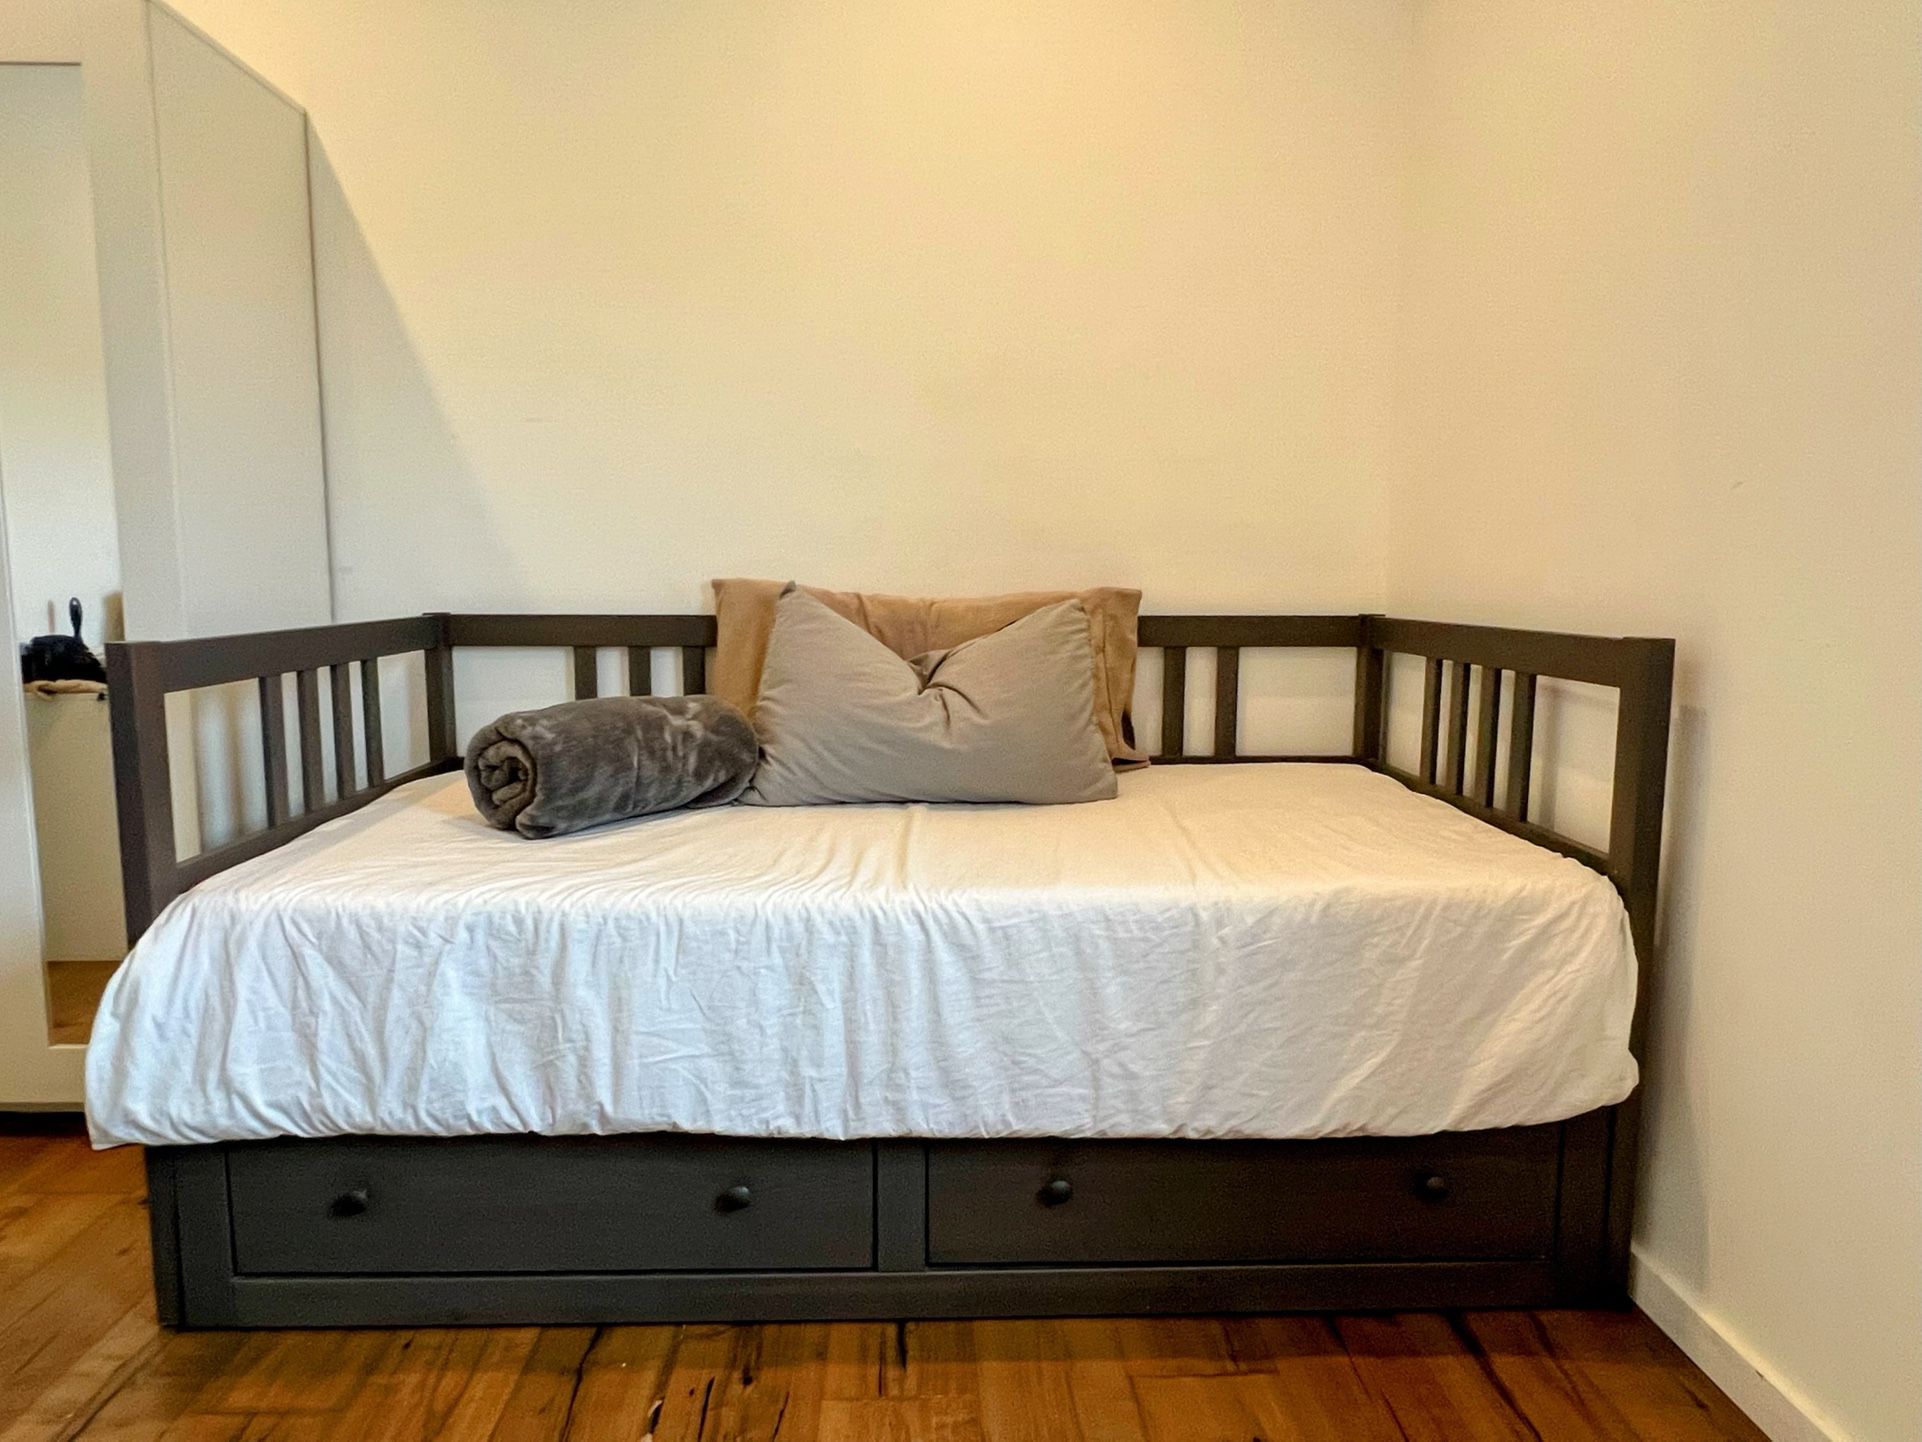 IKEA Twin bed with trundle